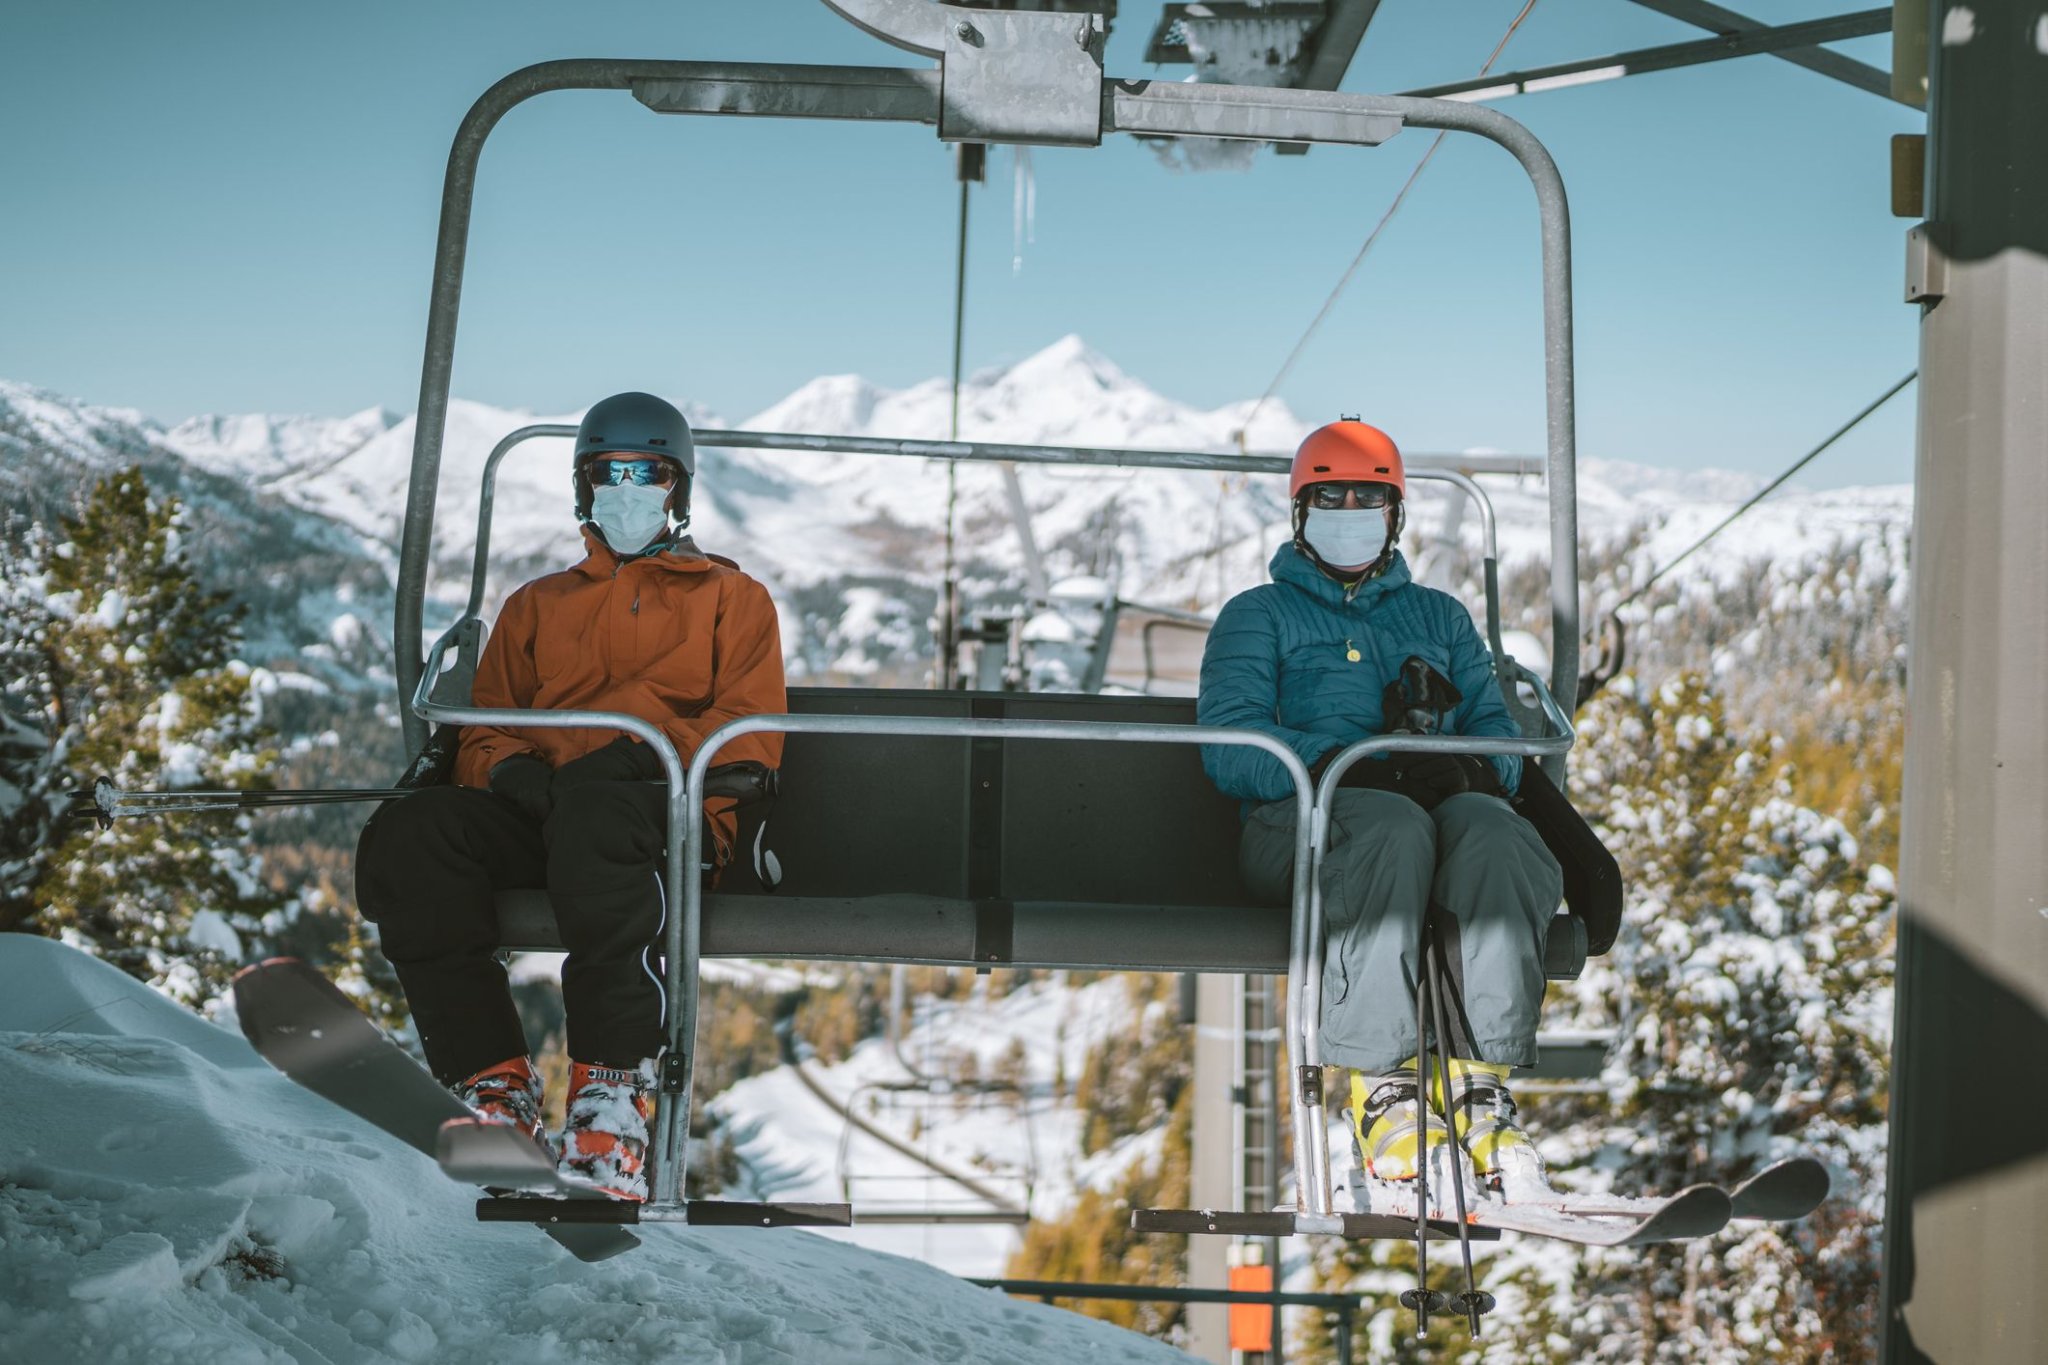 What to Know About Planning a Ski Trip During the COVID-19 Pandemic